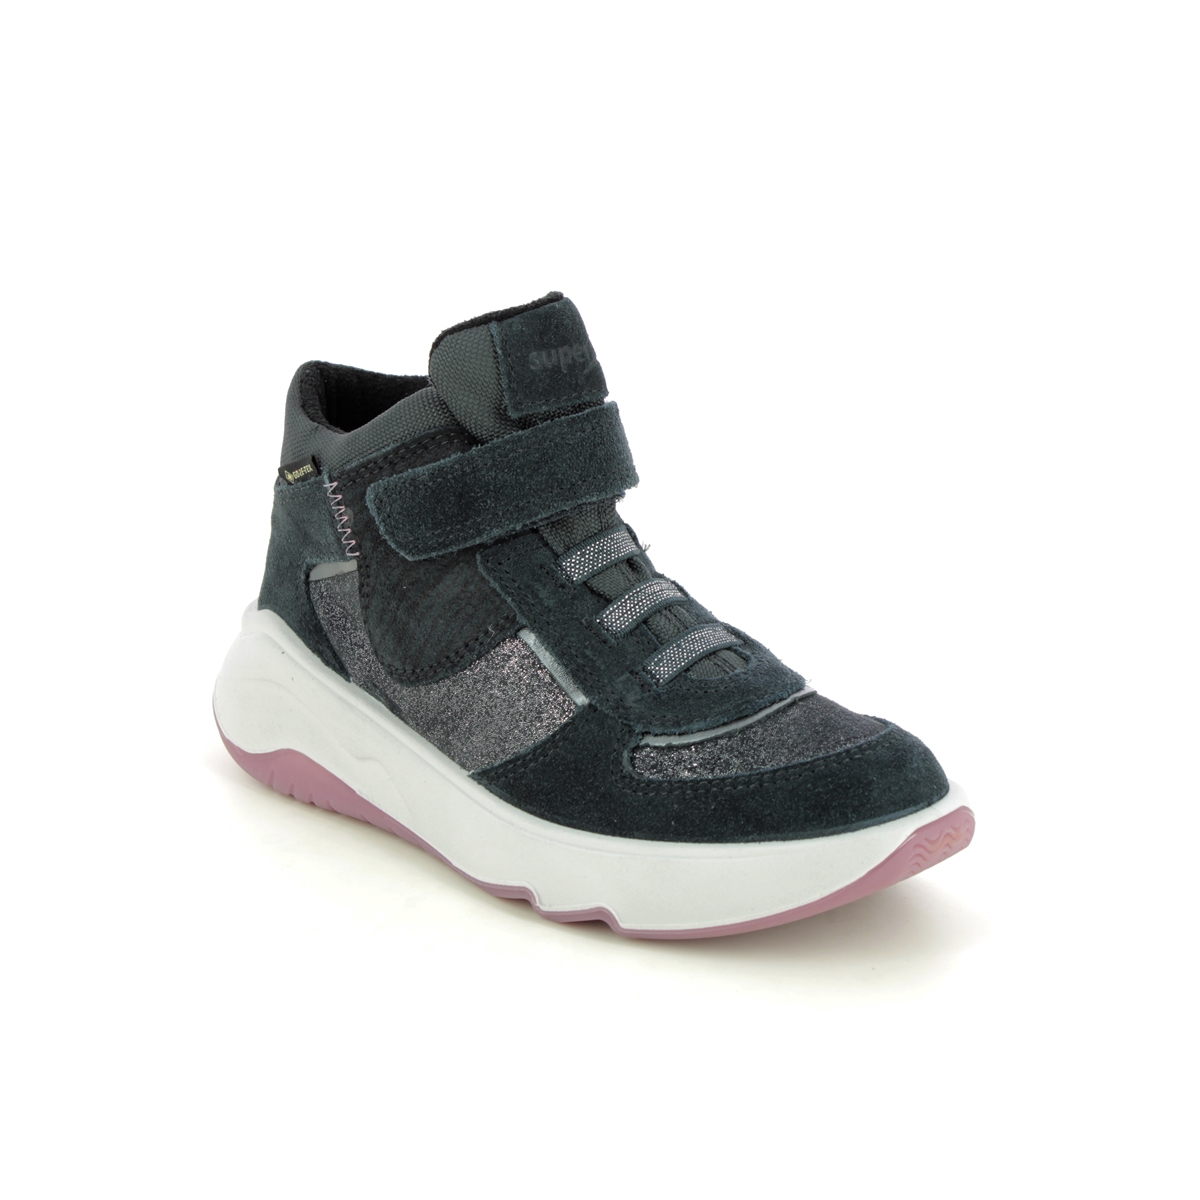 Superfit Melodie Ht Gtx Black Suede Kids Girls Trainers 1000632-2000 In Size 35 In Plain Black Suede For kids